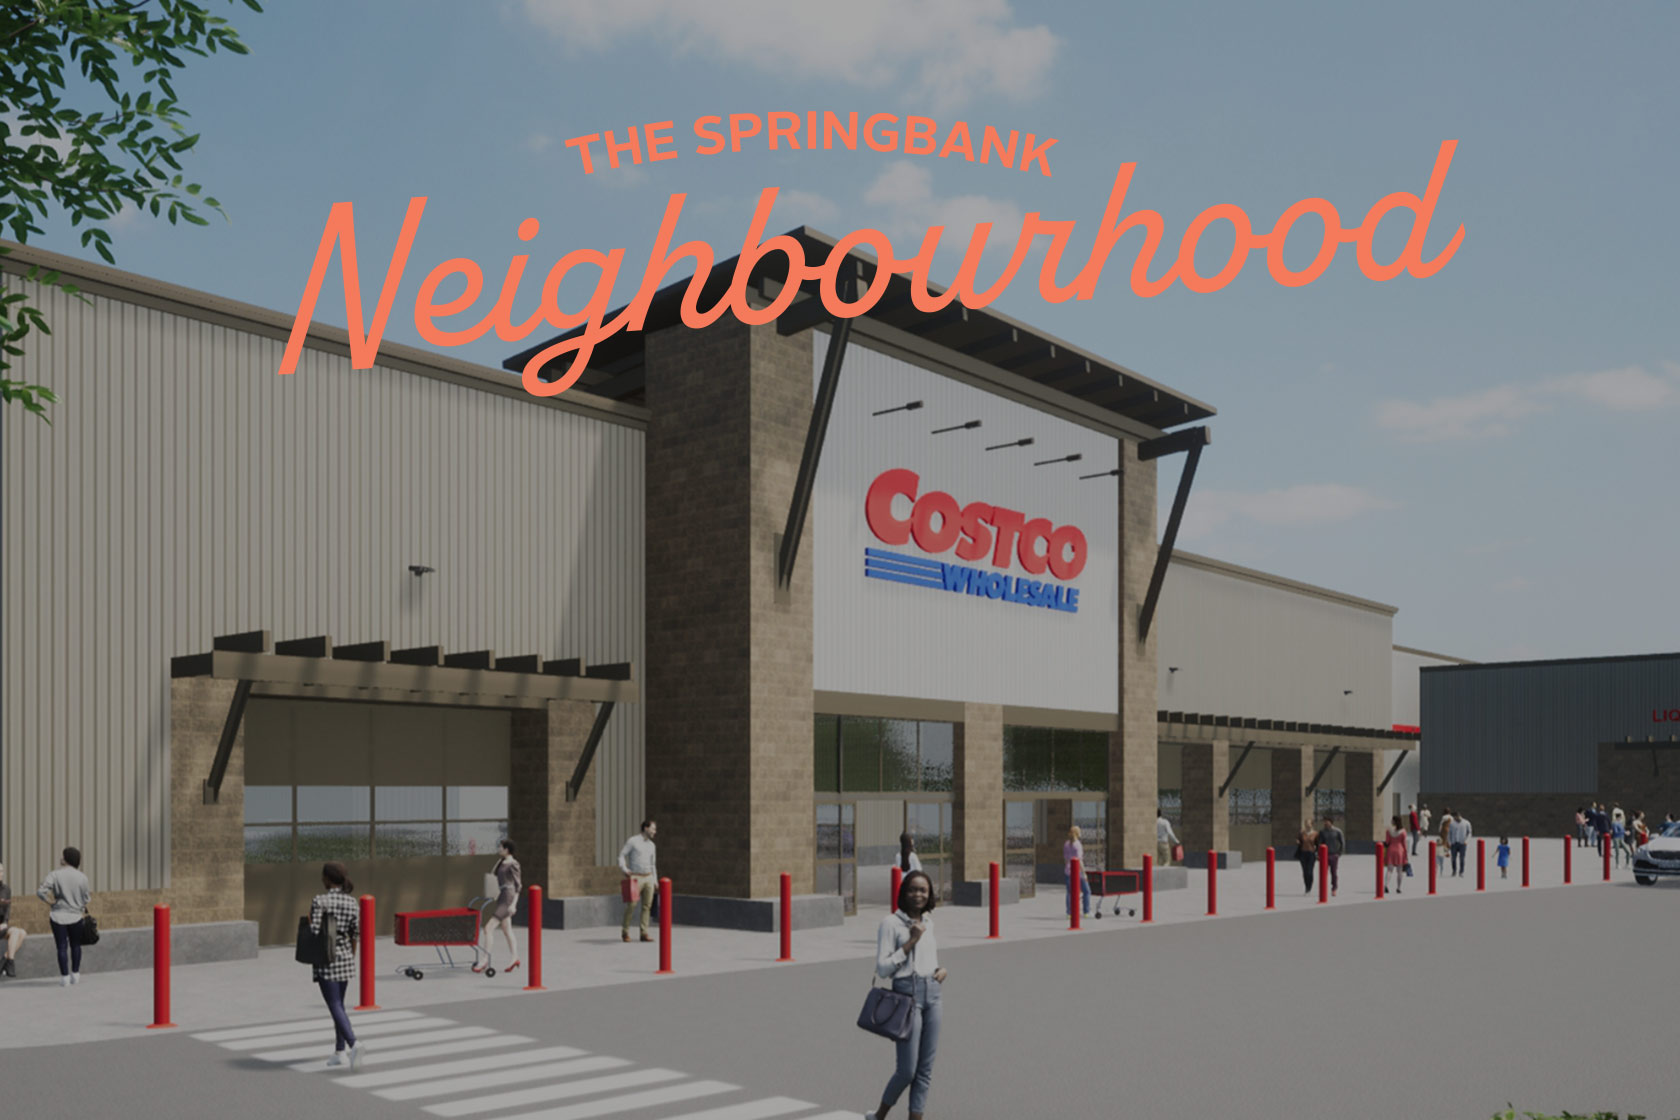 Rendering of the upcoming Costco in Springbank